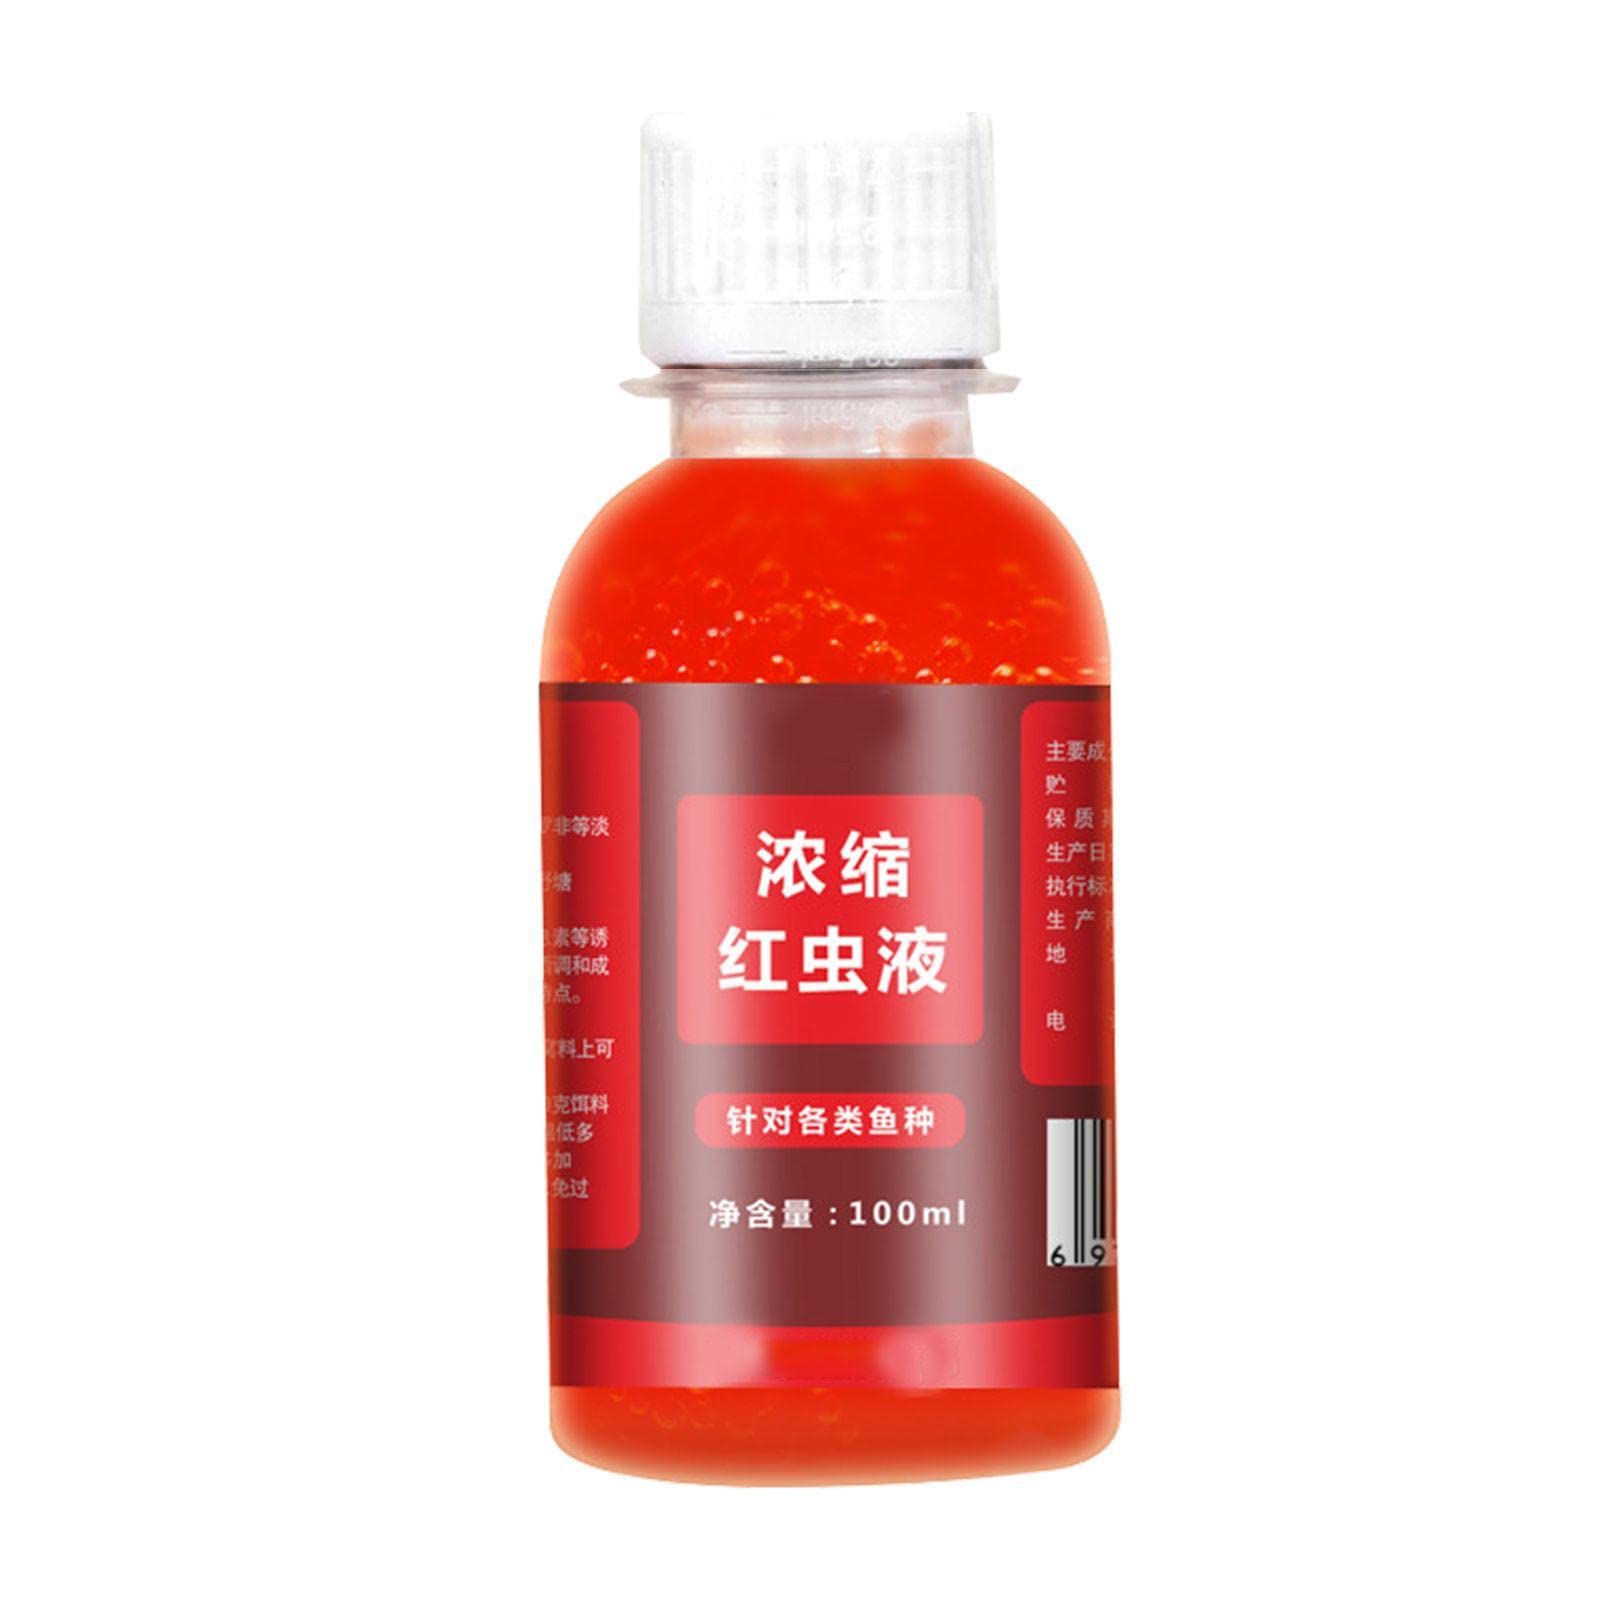 Hulzogul Bait Fish Additive, 100ml Red Worm Concentrate Liquid, Fishing Baits, High Concentration Fishing Lures, Fish Bait Attraction Enhancer for Trout, Cod, Carp, Bass,